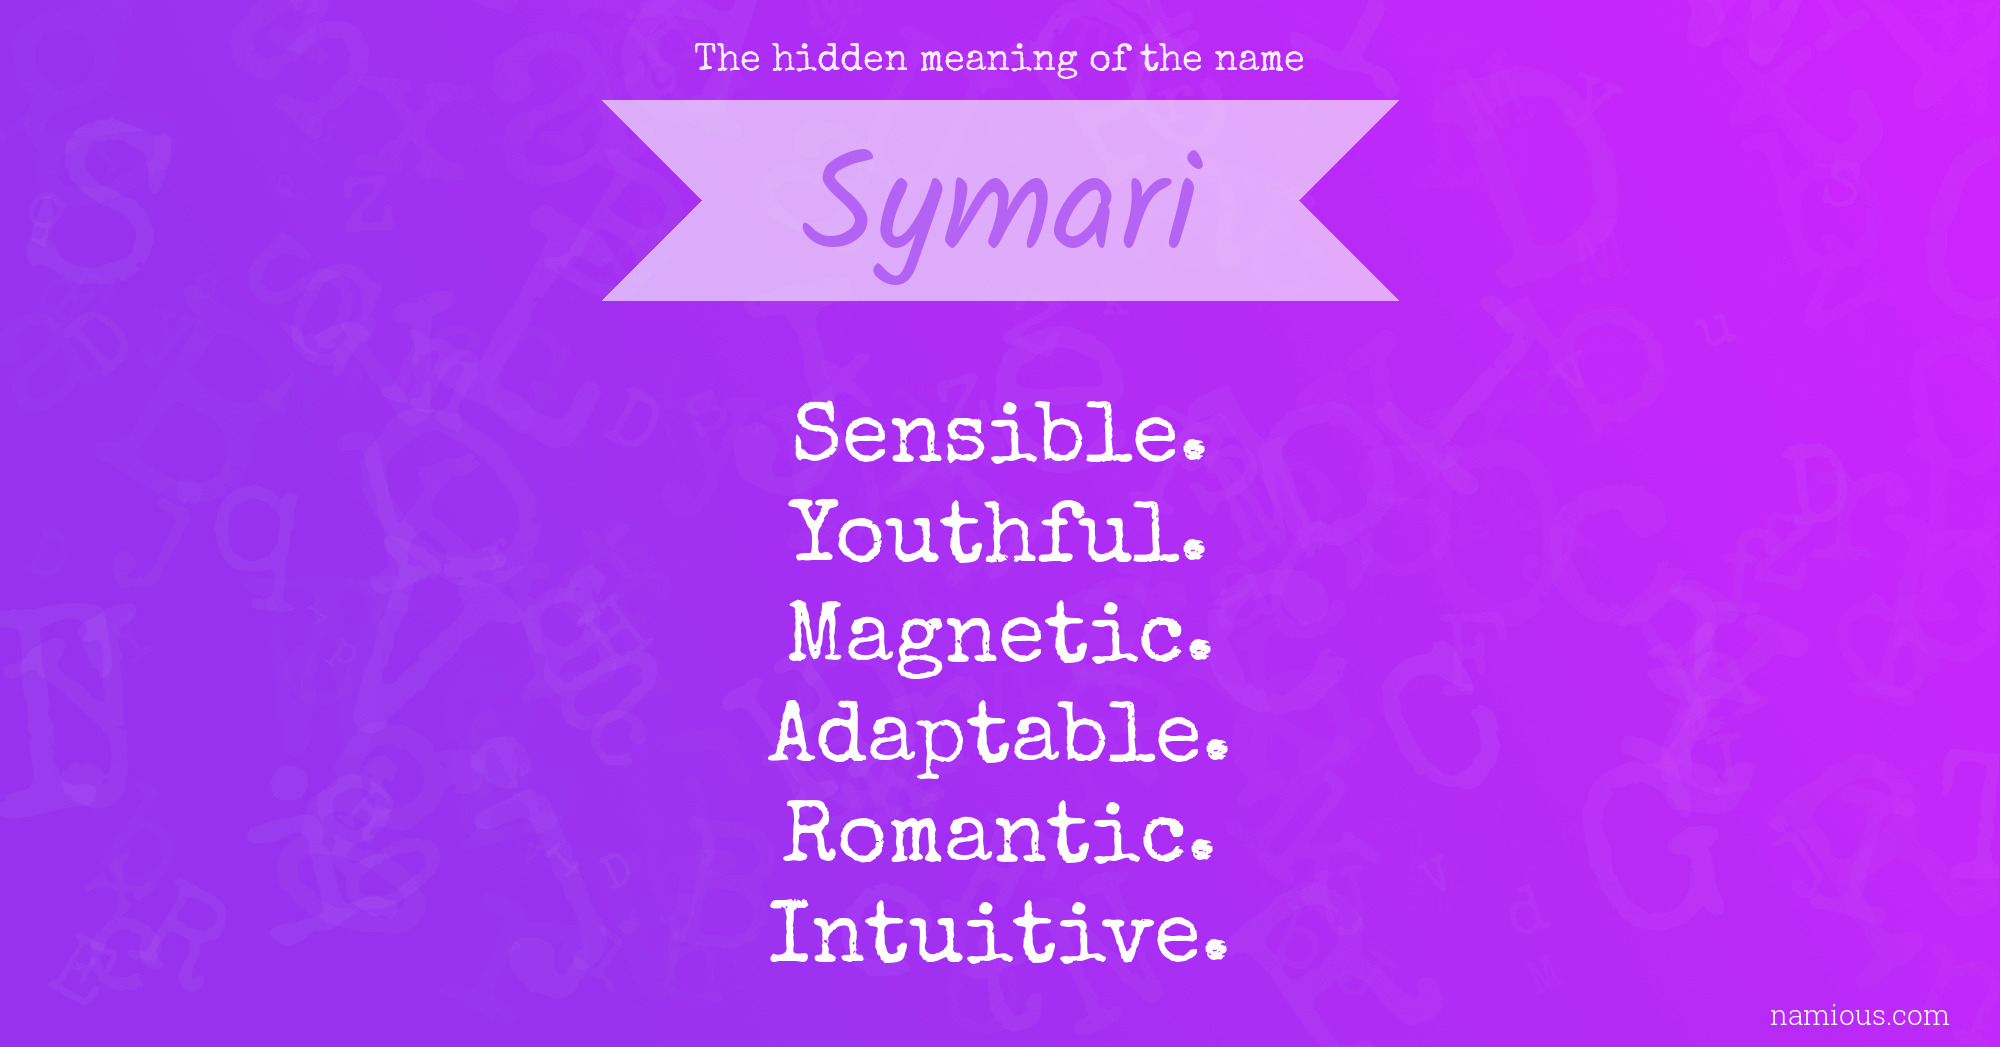 The hidden meaning of the name Symari